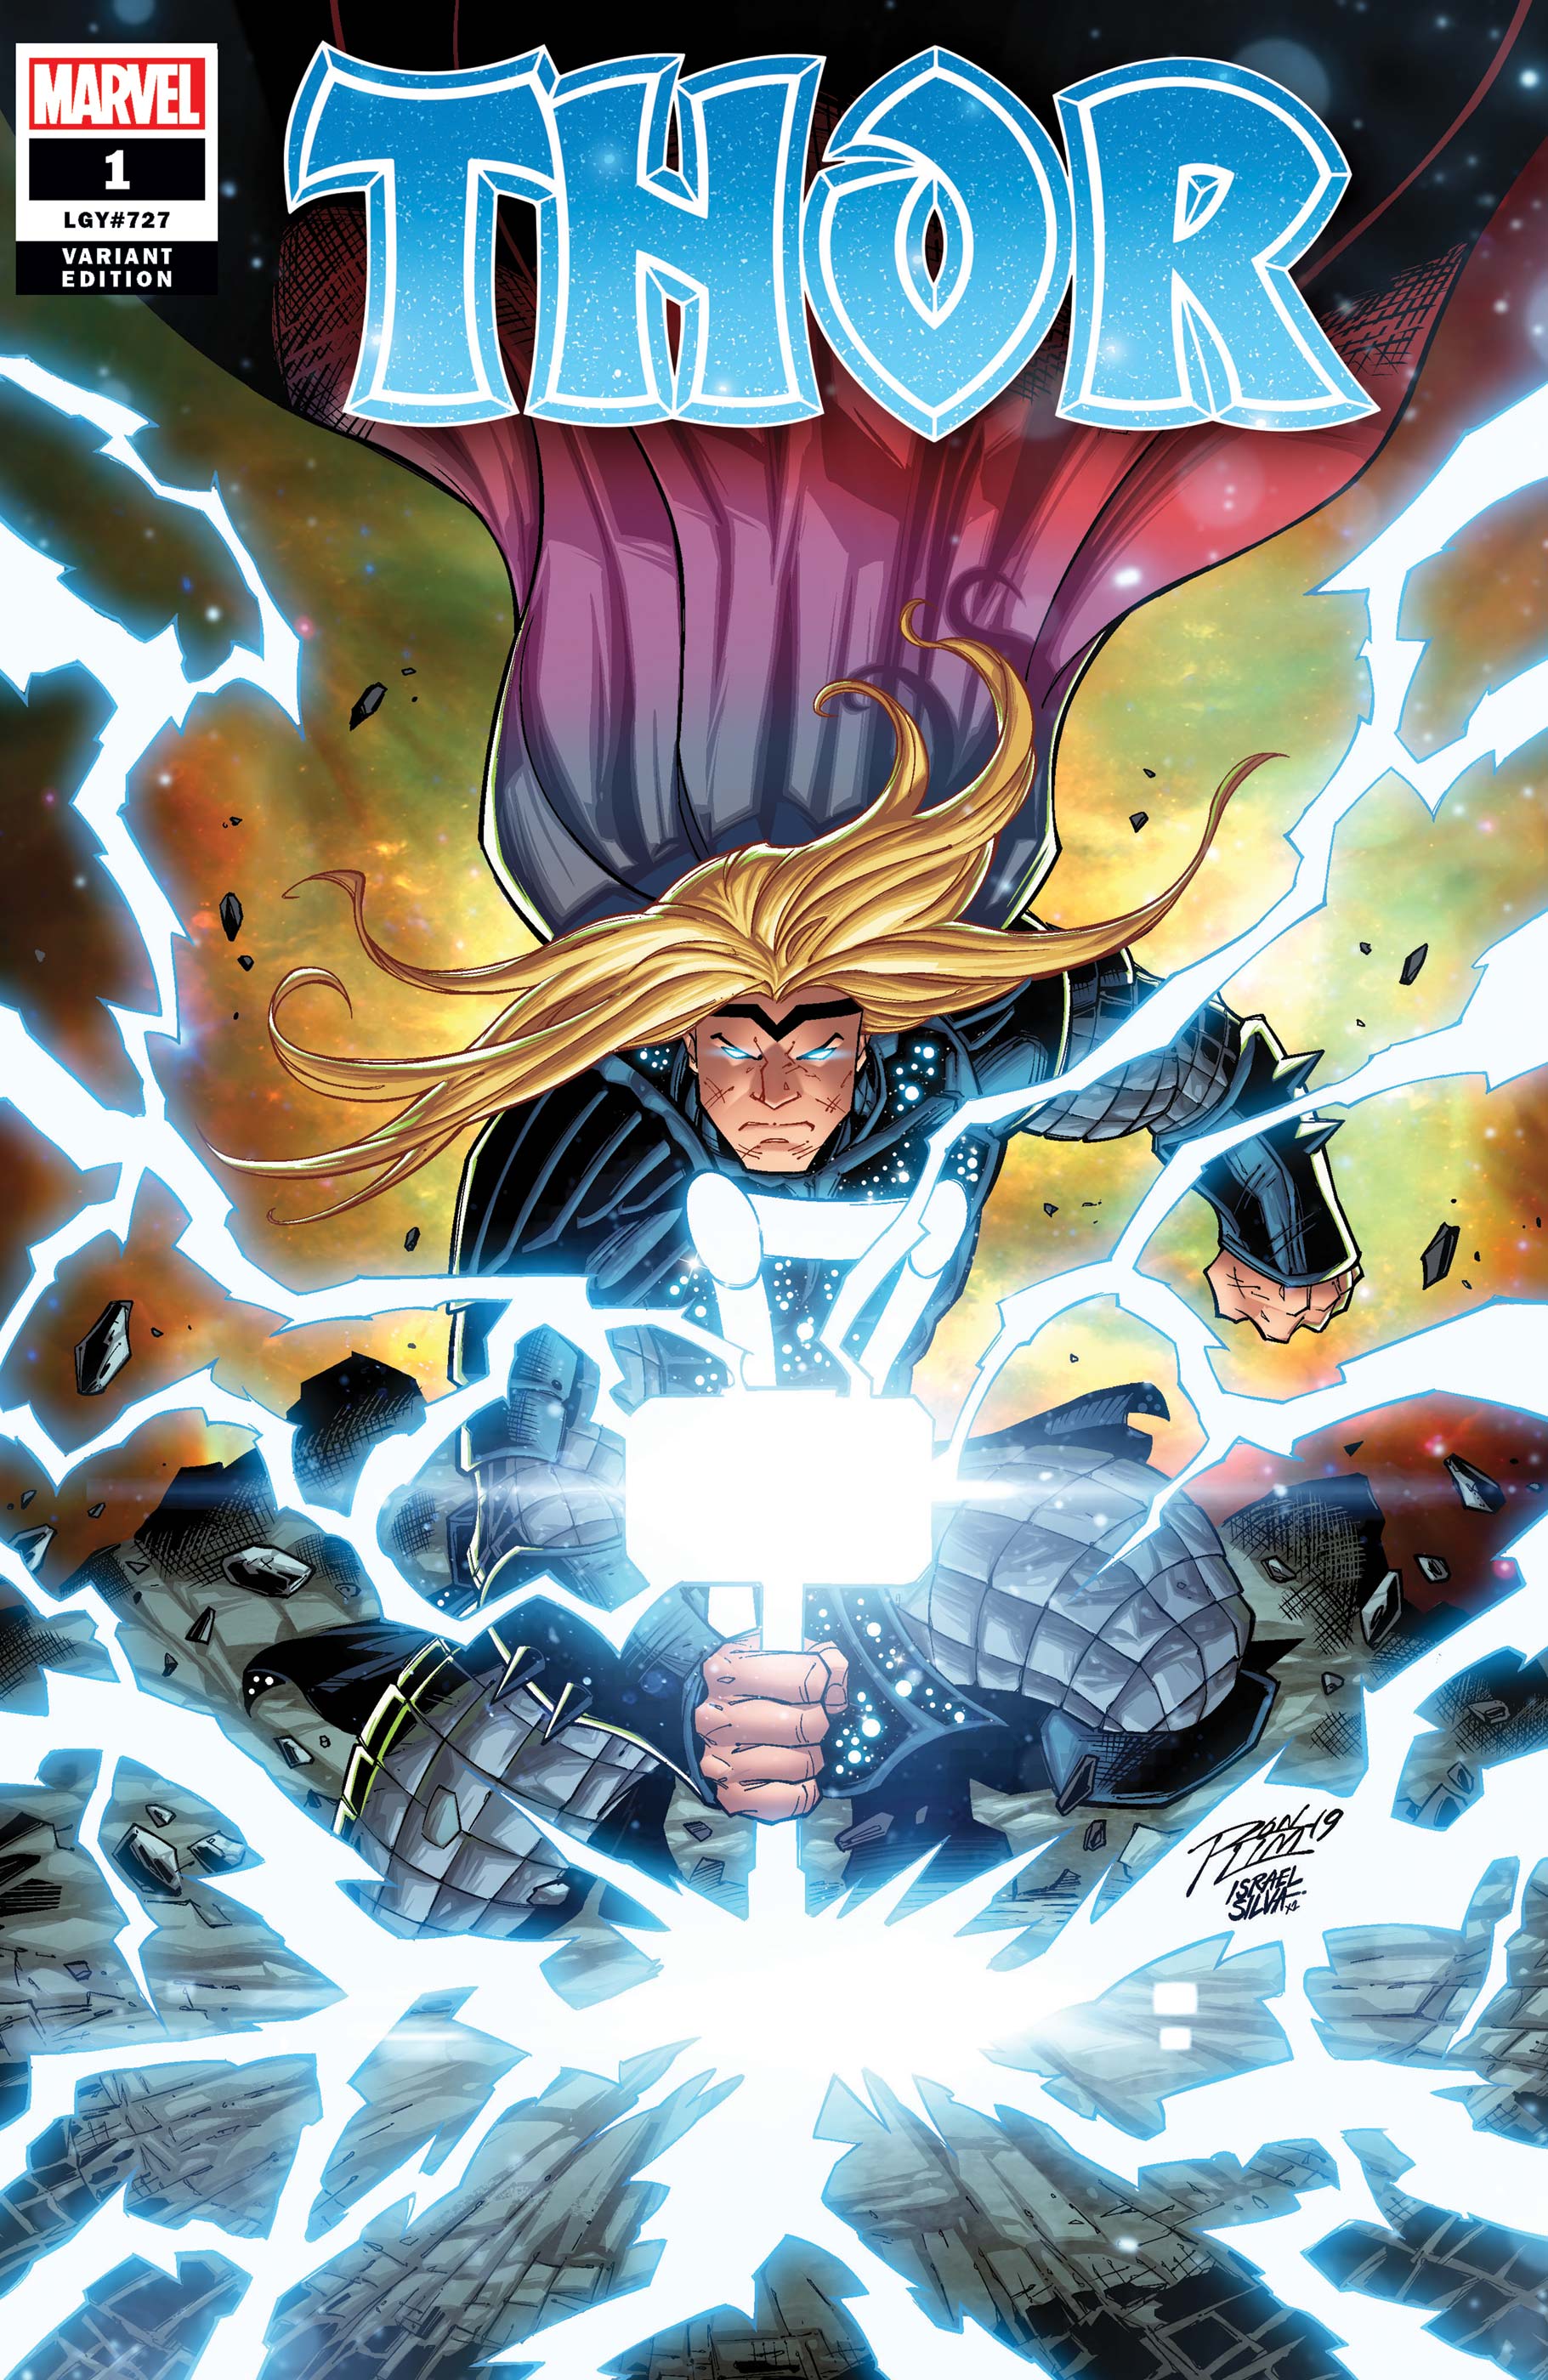 5 1 3 4 2020 12 in a SET variant Covers 6 NM 10 9 2 ,7 8 11 THOR 